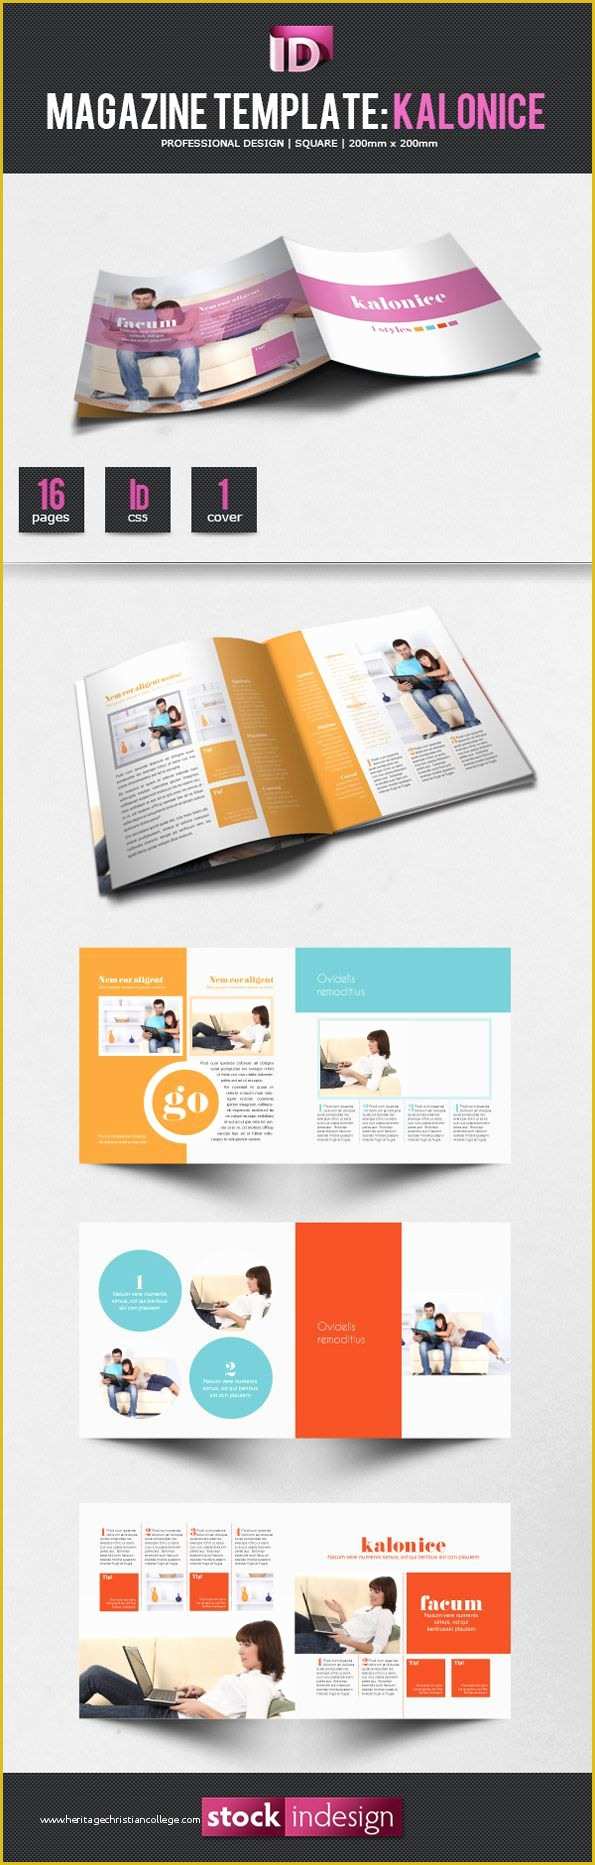 Free Magazine Template Indesign Of Free Indesign Magazine Template Kalonice